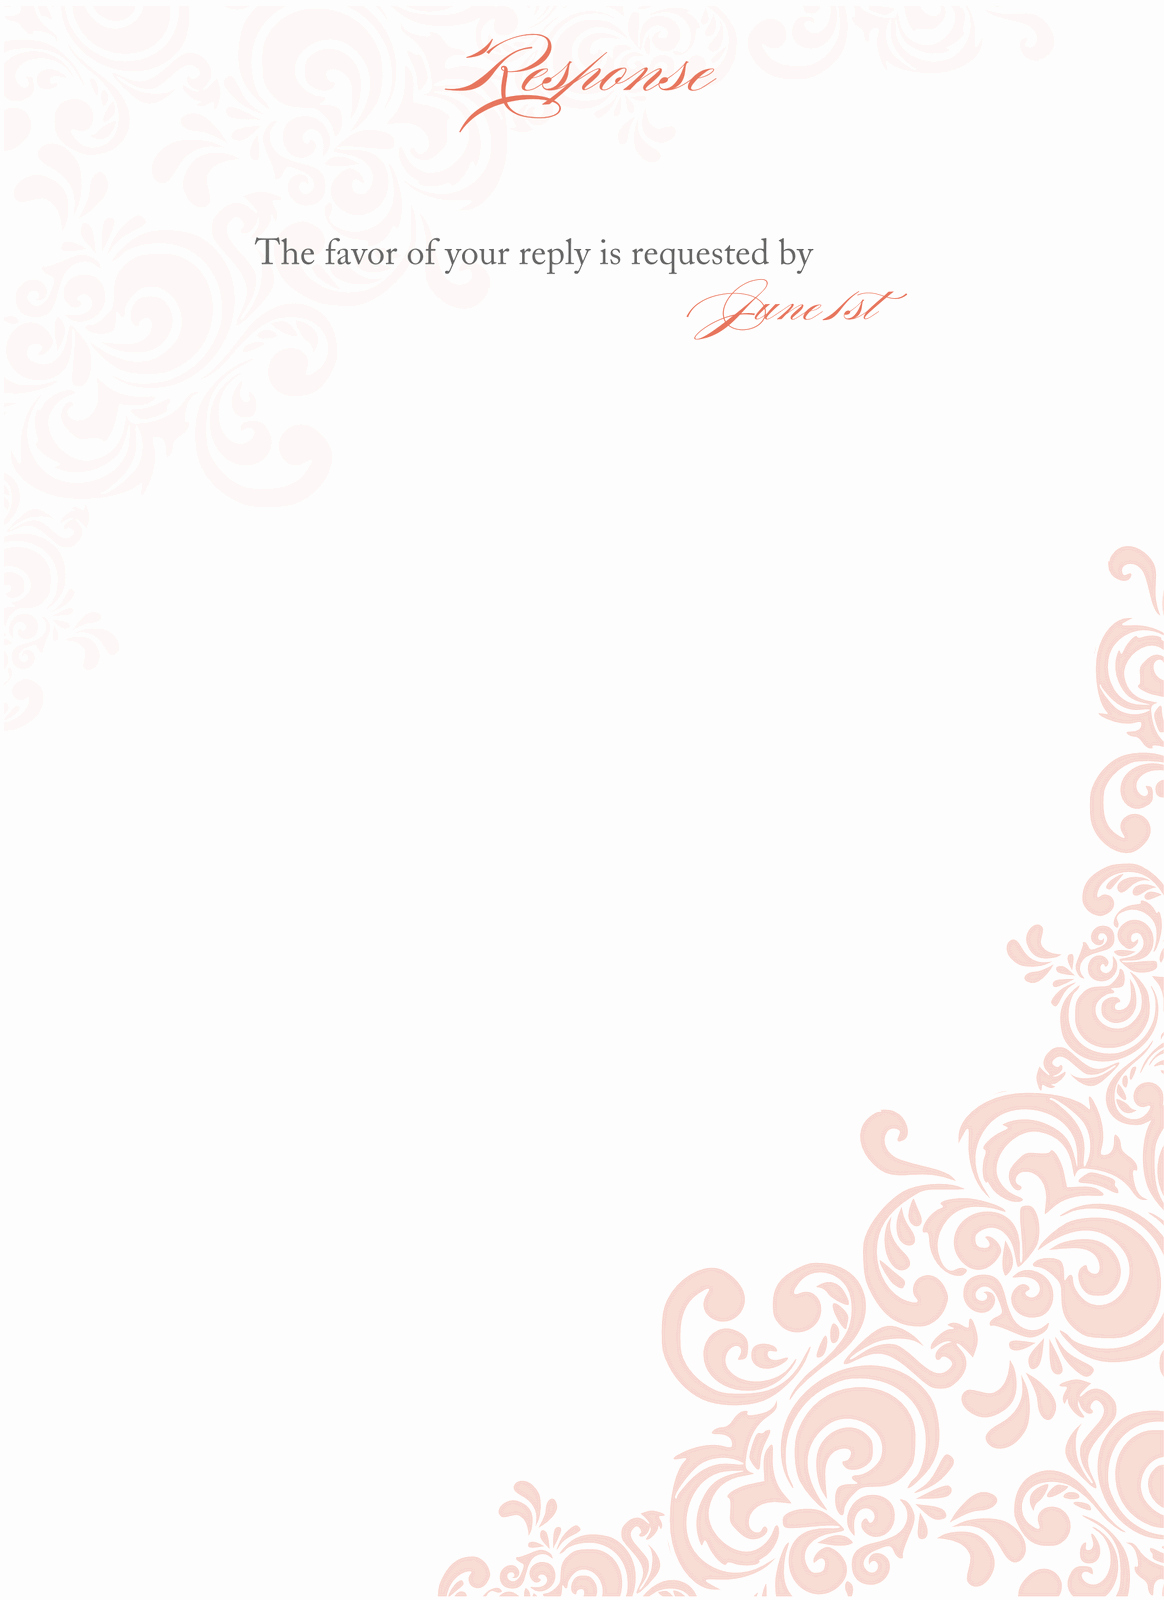 Wedding Invitation Templates Downloads Lovely Floral Blank Wedding Invitation Templates